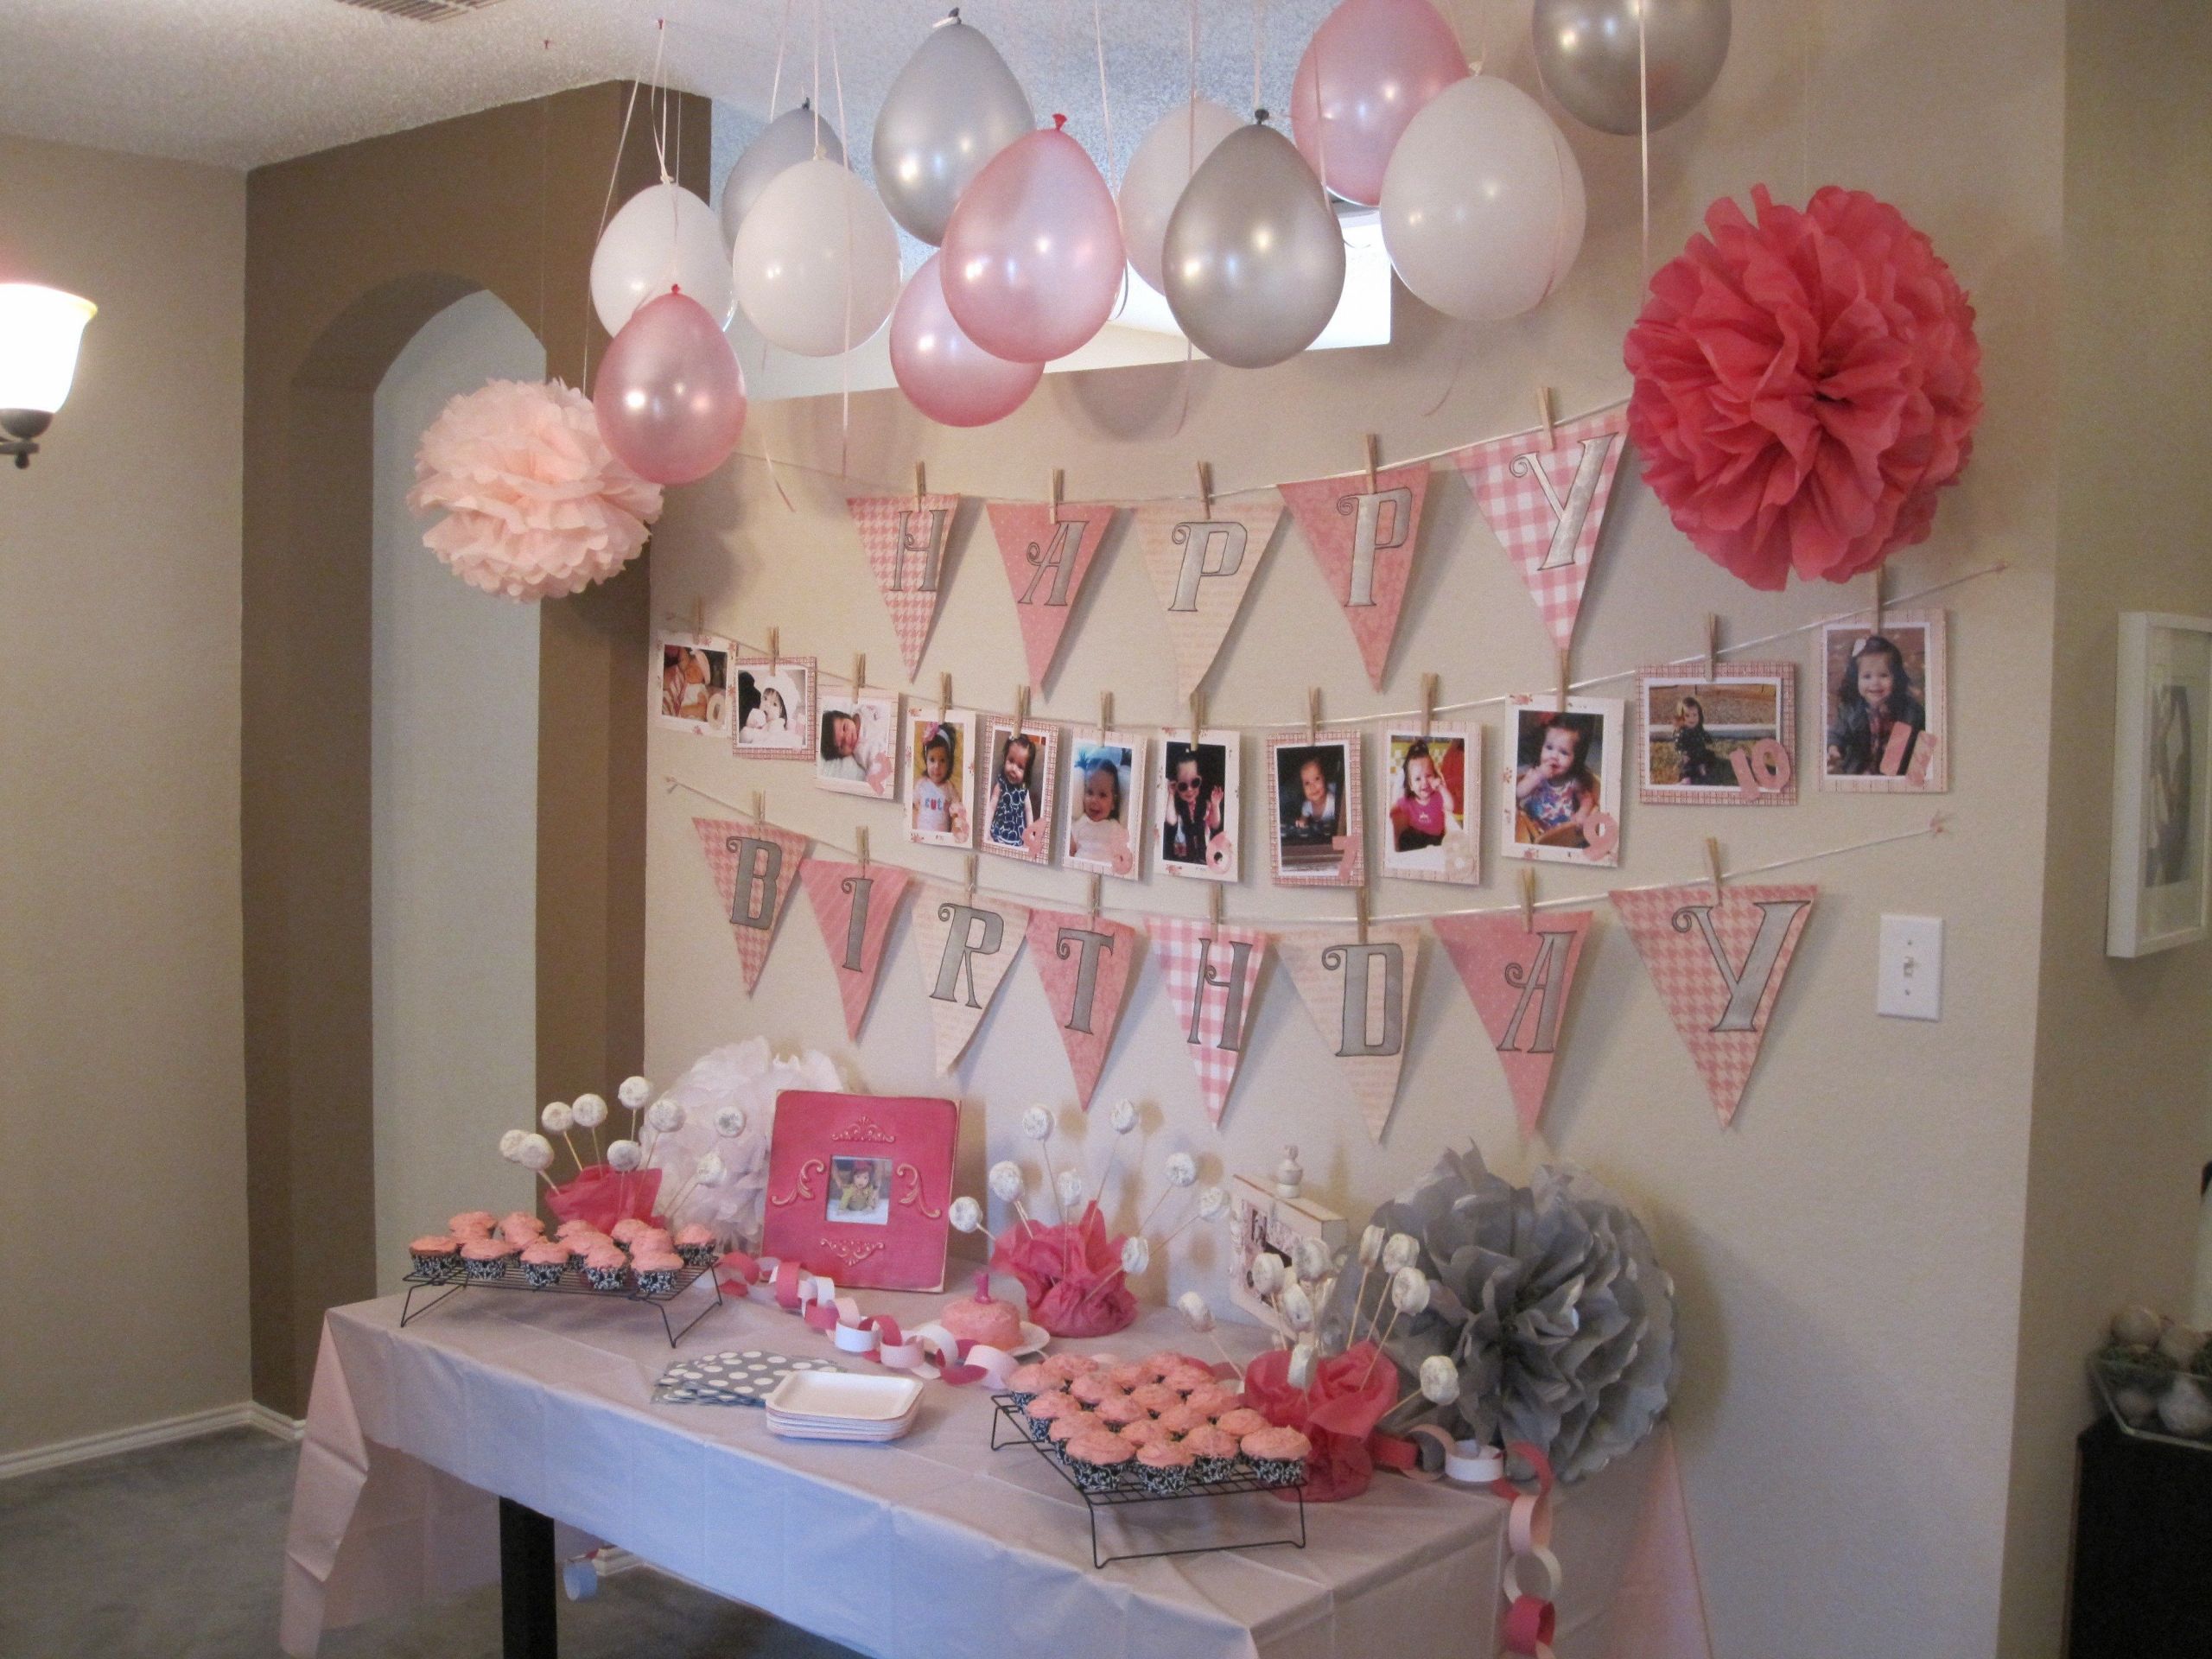 How To Decorate Birthday Party At Home
 Fresh First Birthday Decoration Ideas at Home for Girl